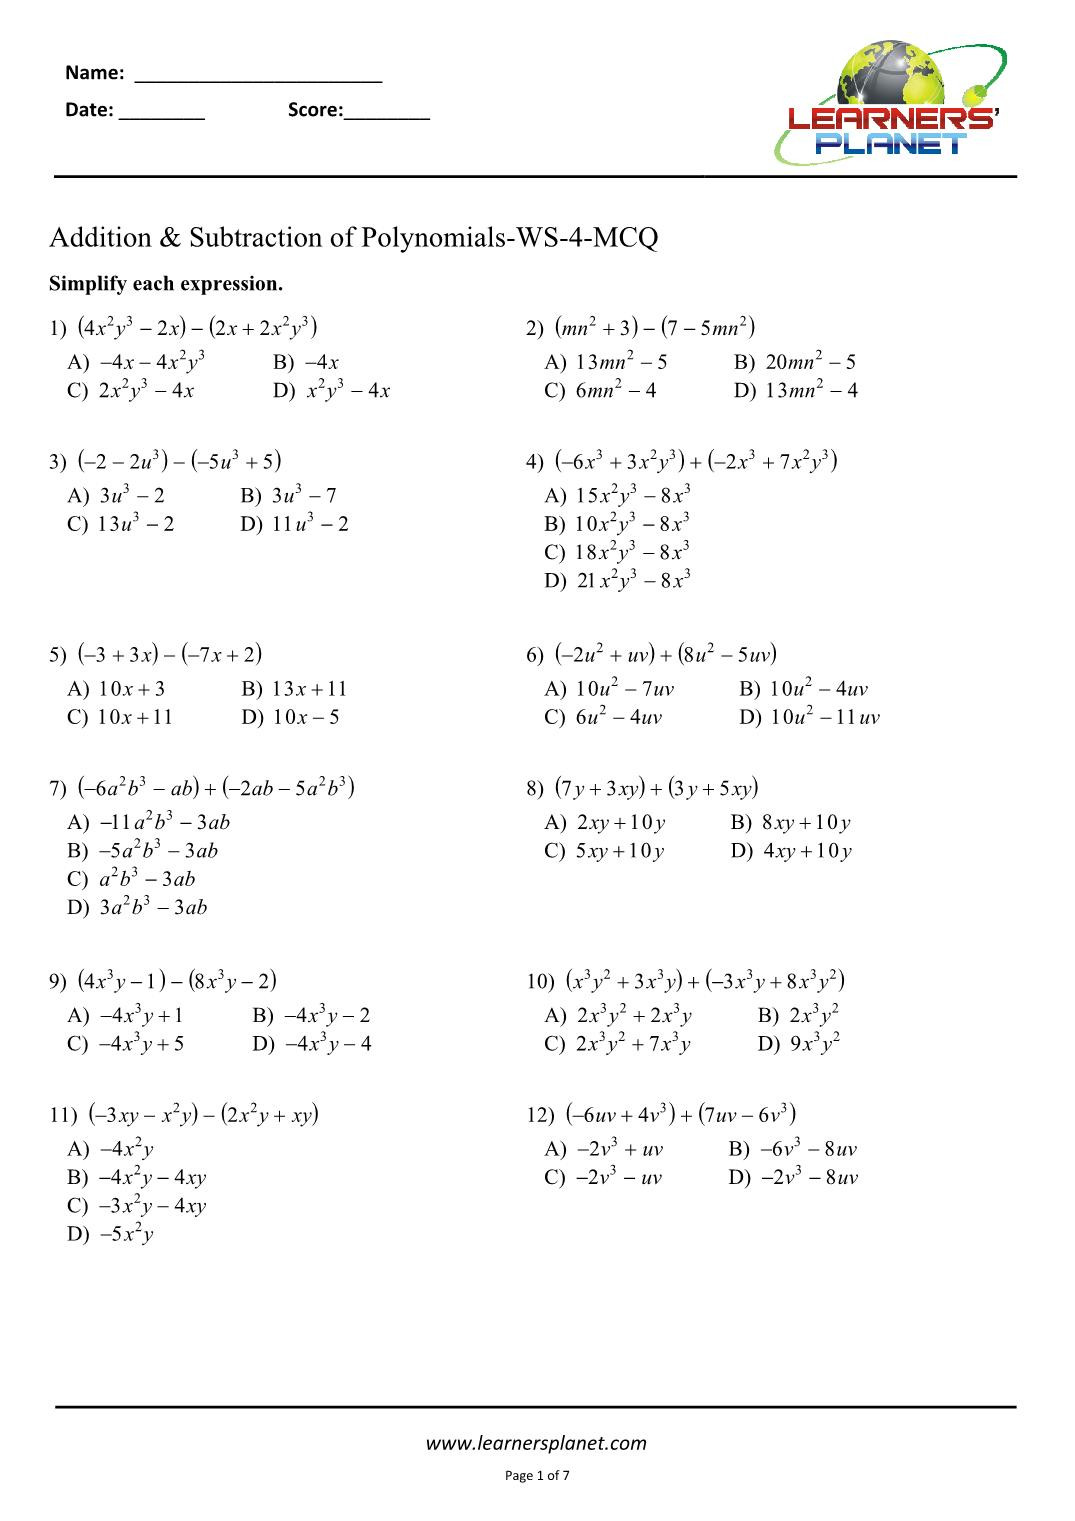 Adding and Subtracting Polynomials Worksheet Adding and Subtracting Polynomials Worksheets 8th Cbse